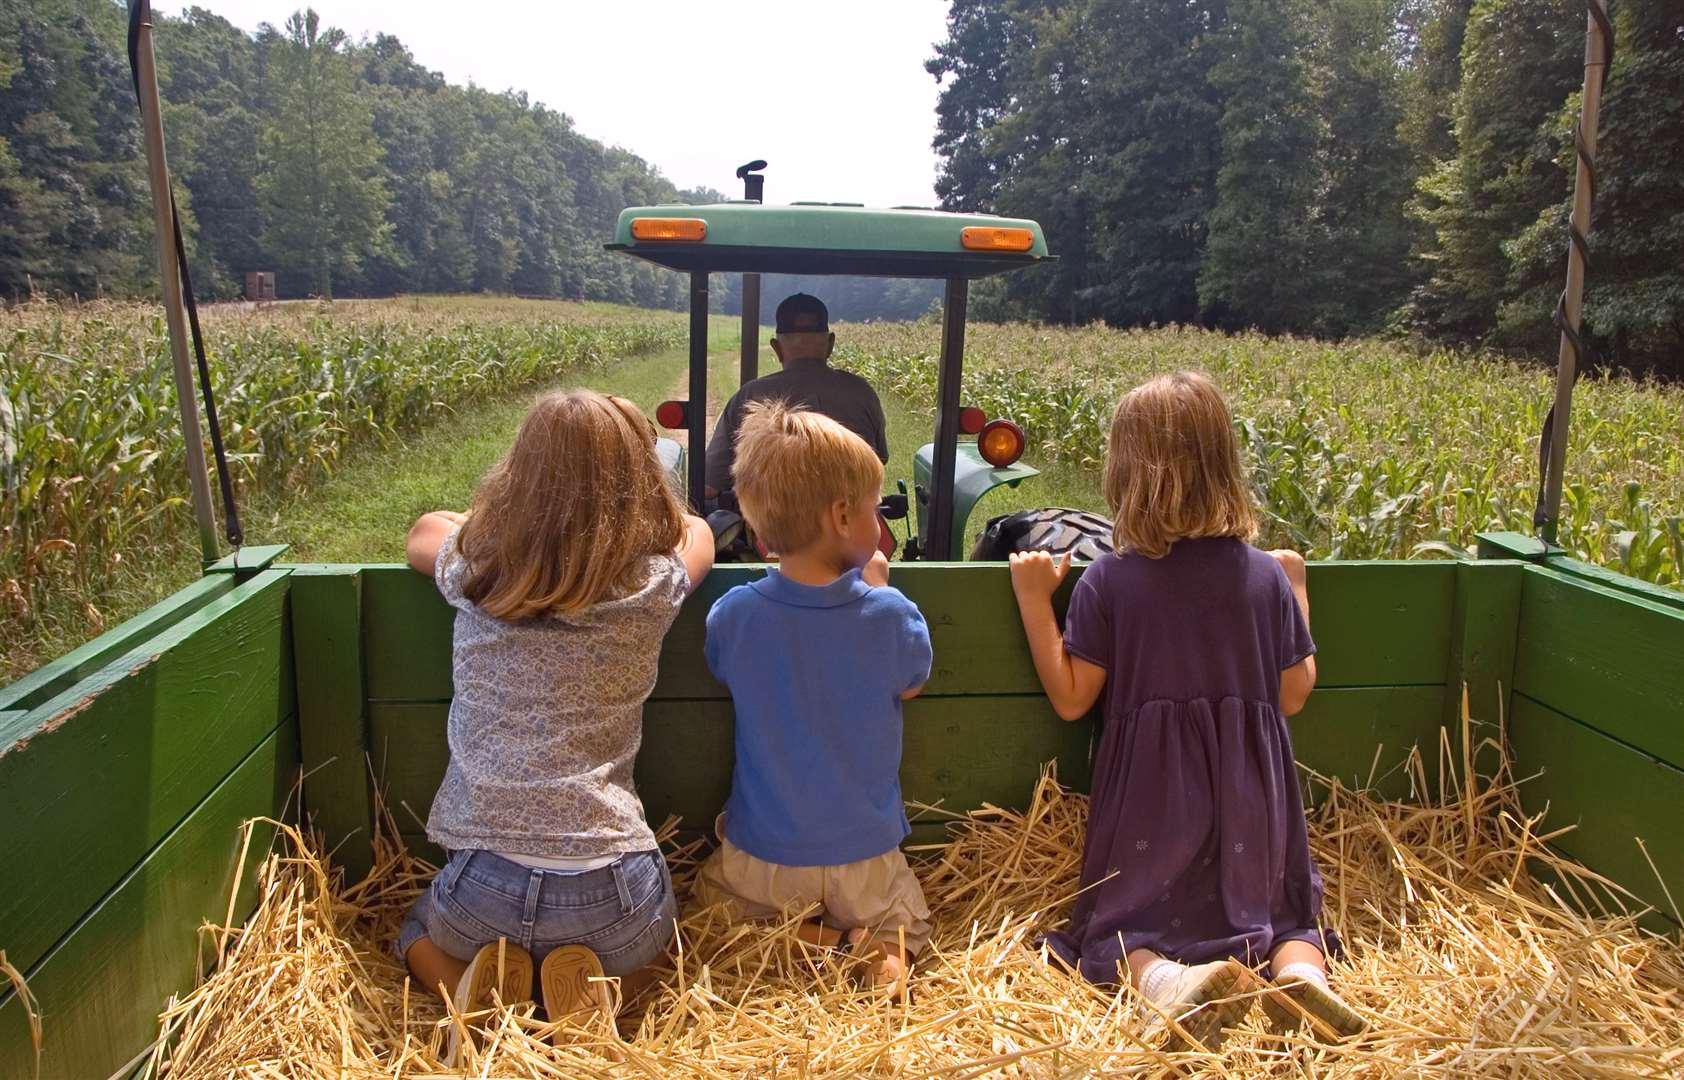 Could a tractor ride be on your family bank holiday list?